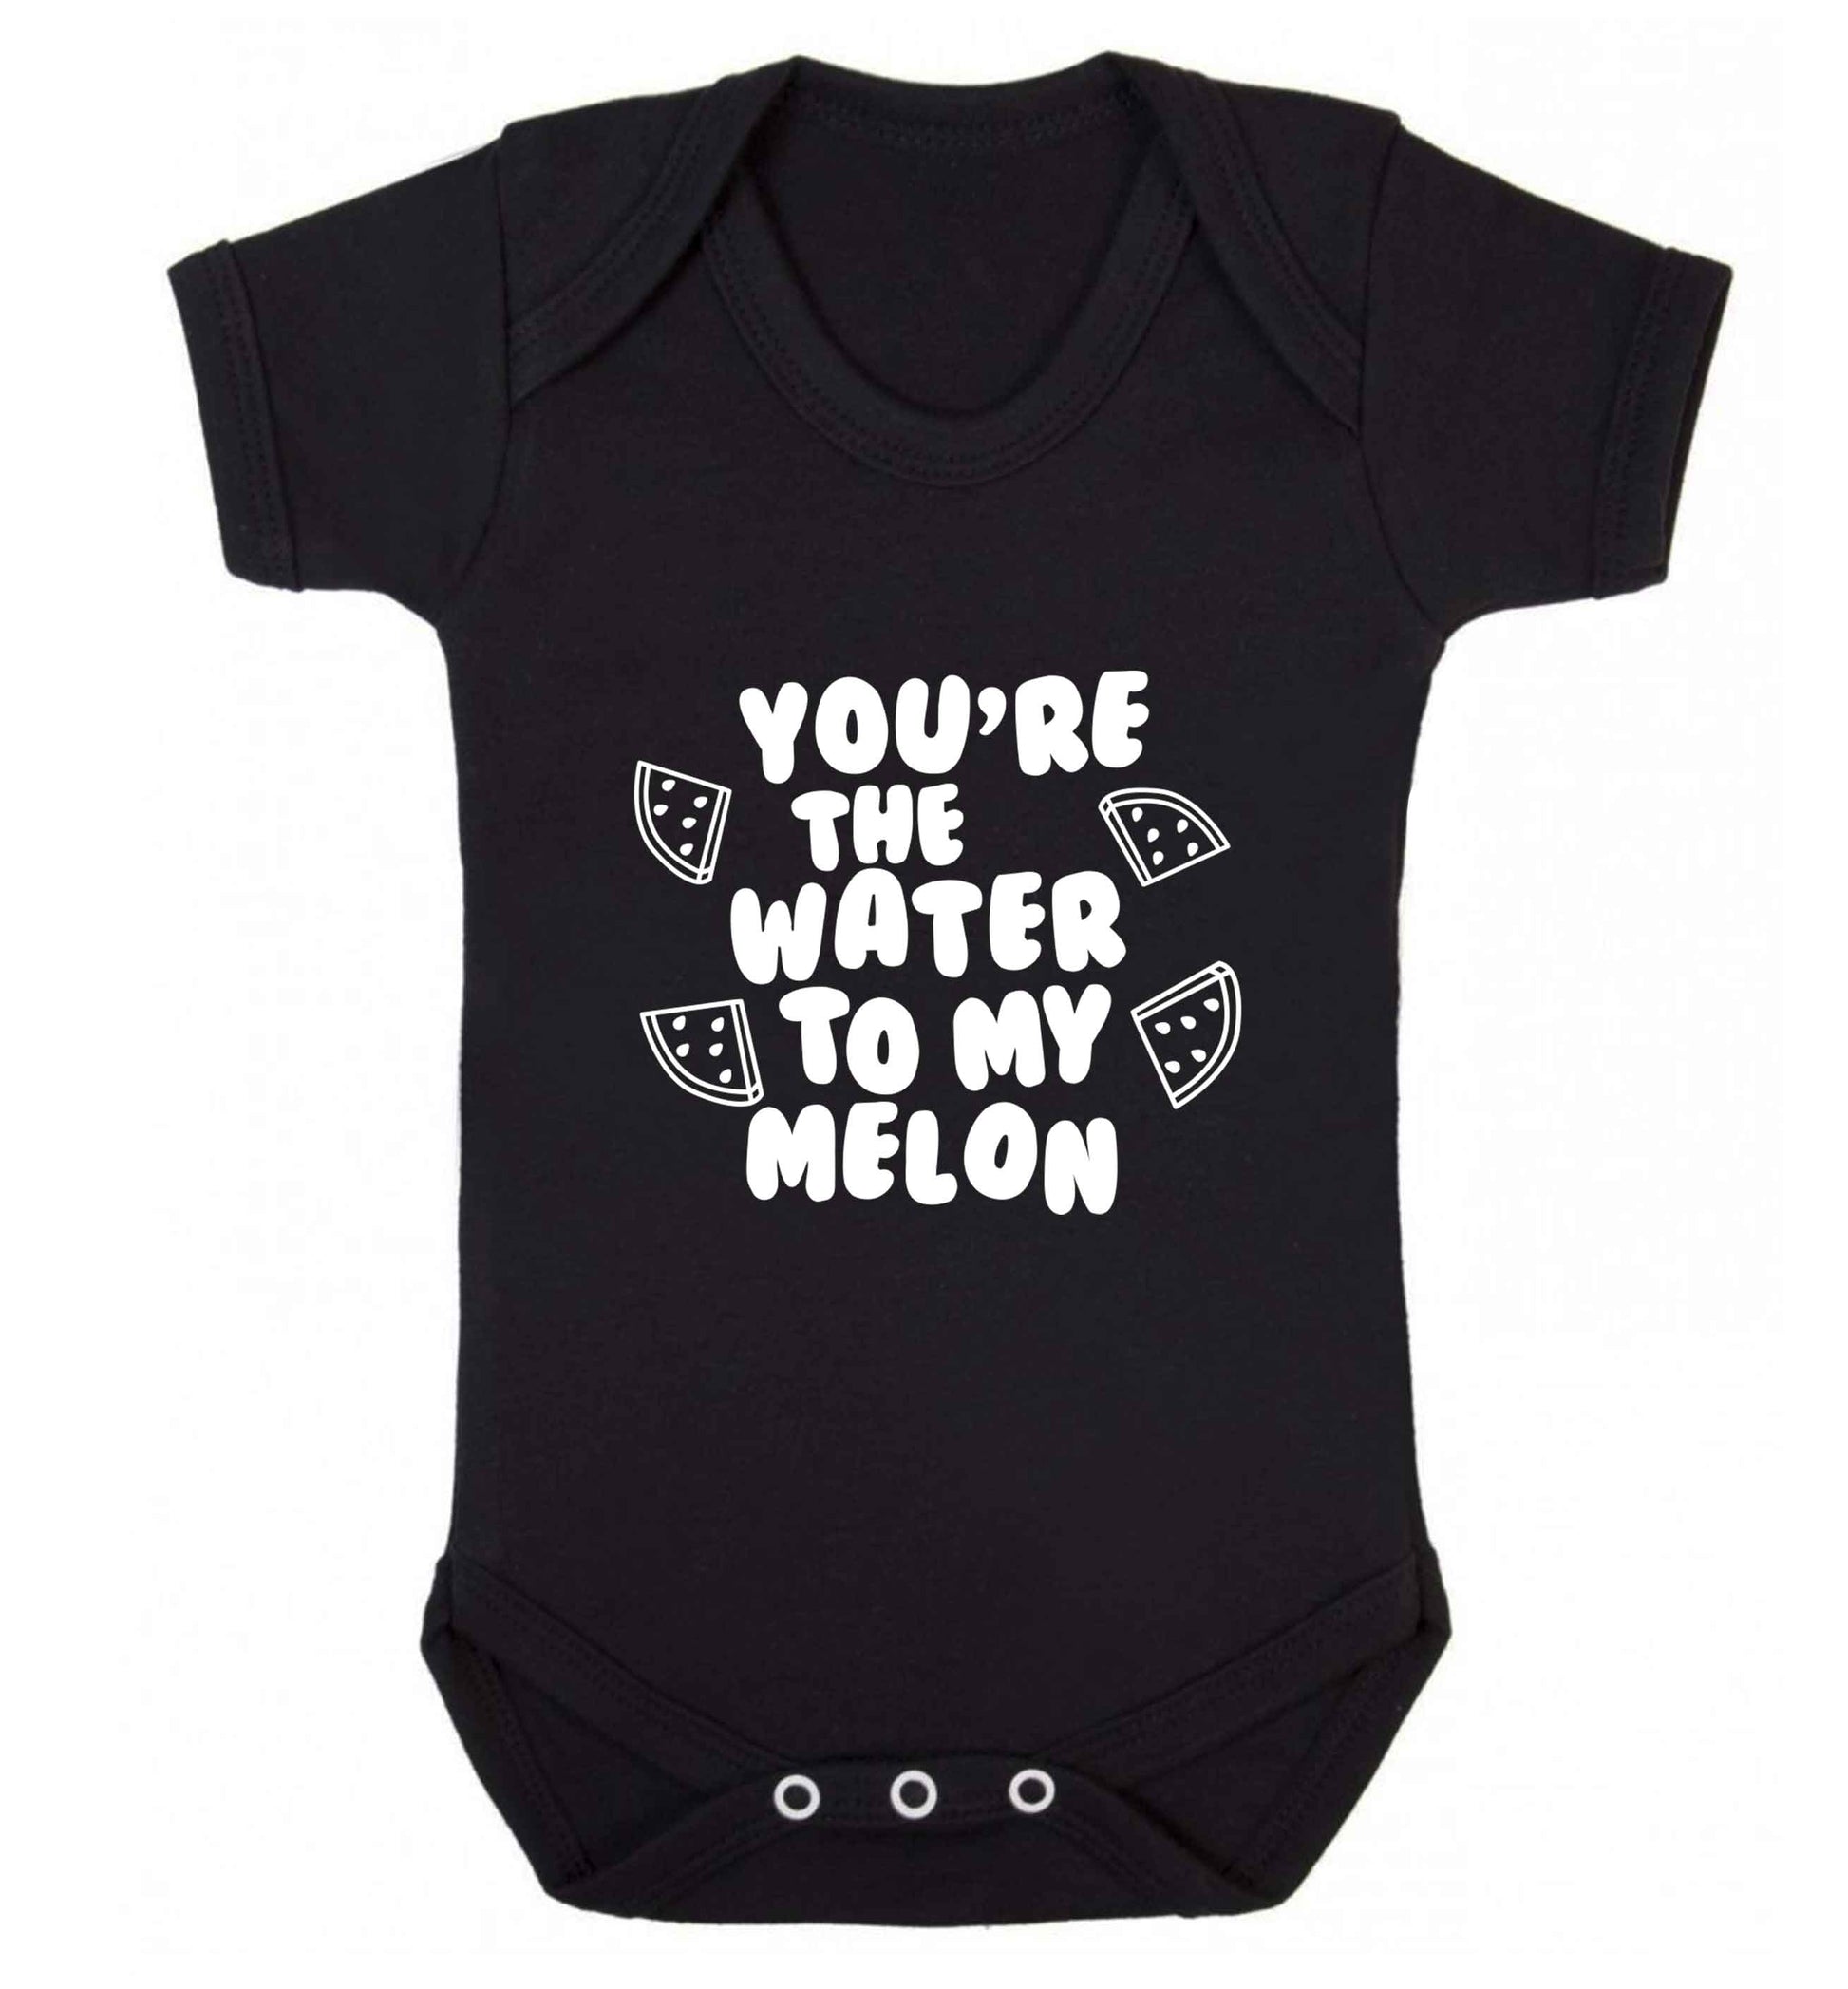 You're the water to my melon baby vest black 18-24 months